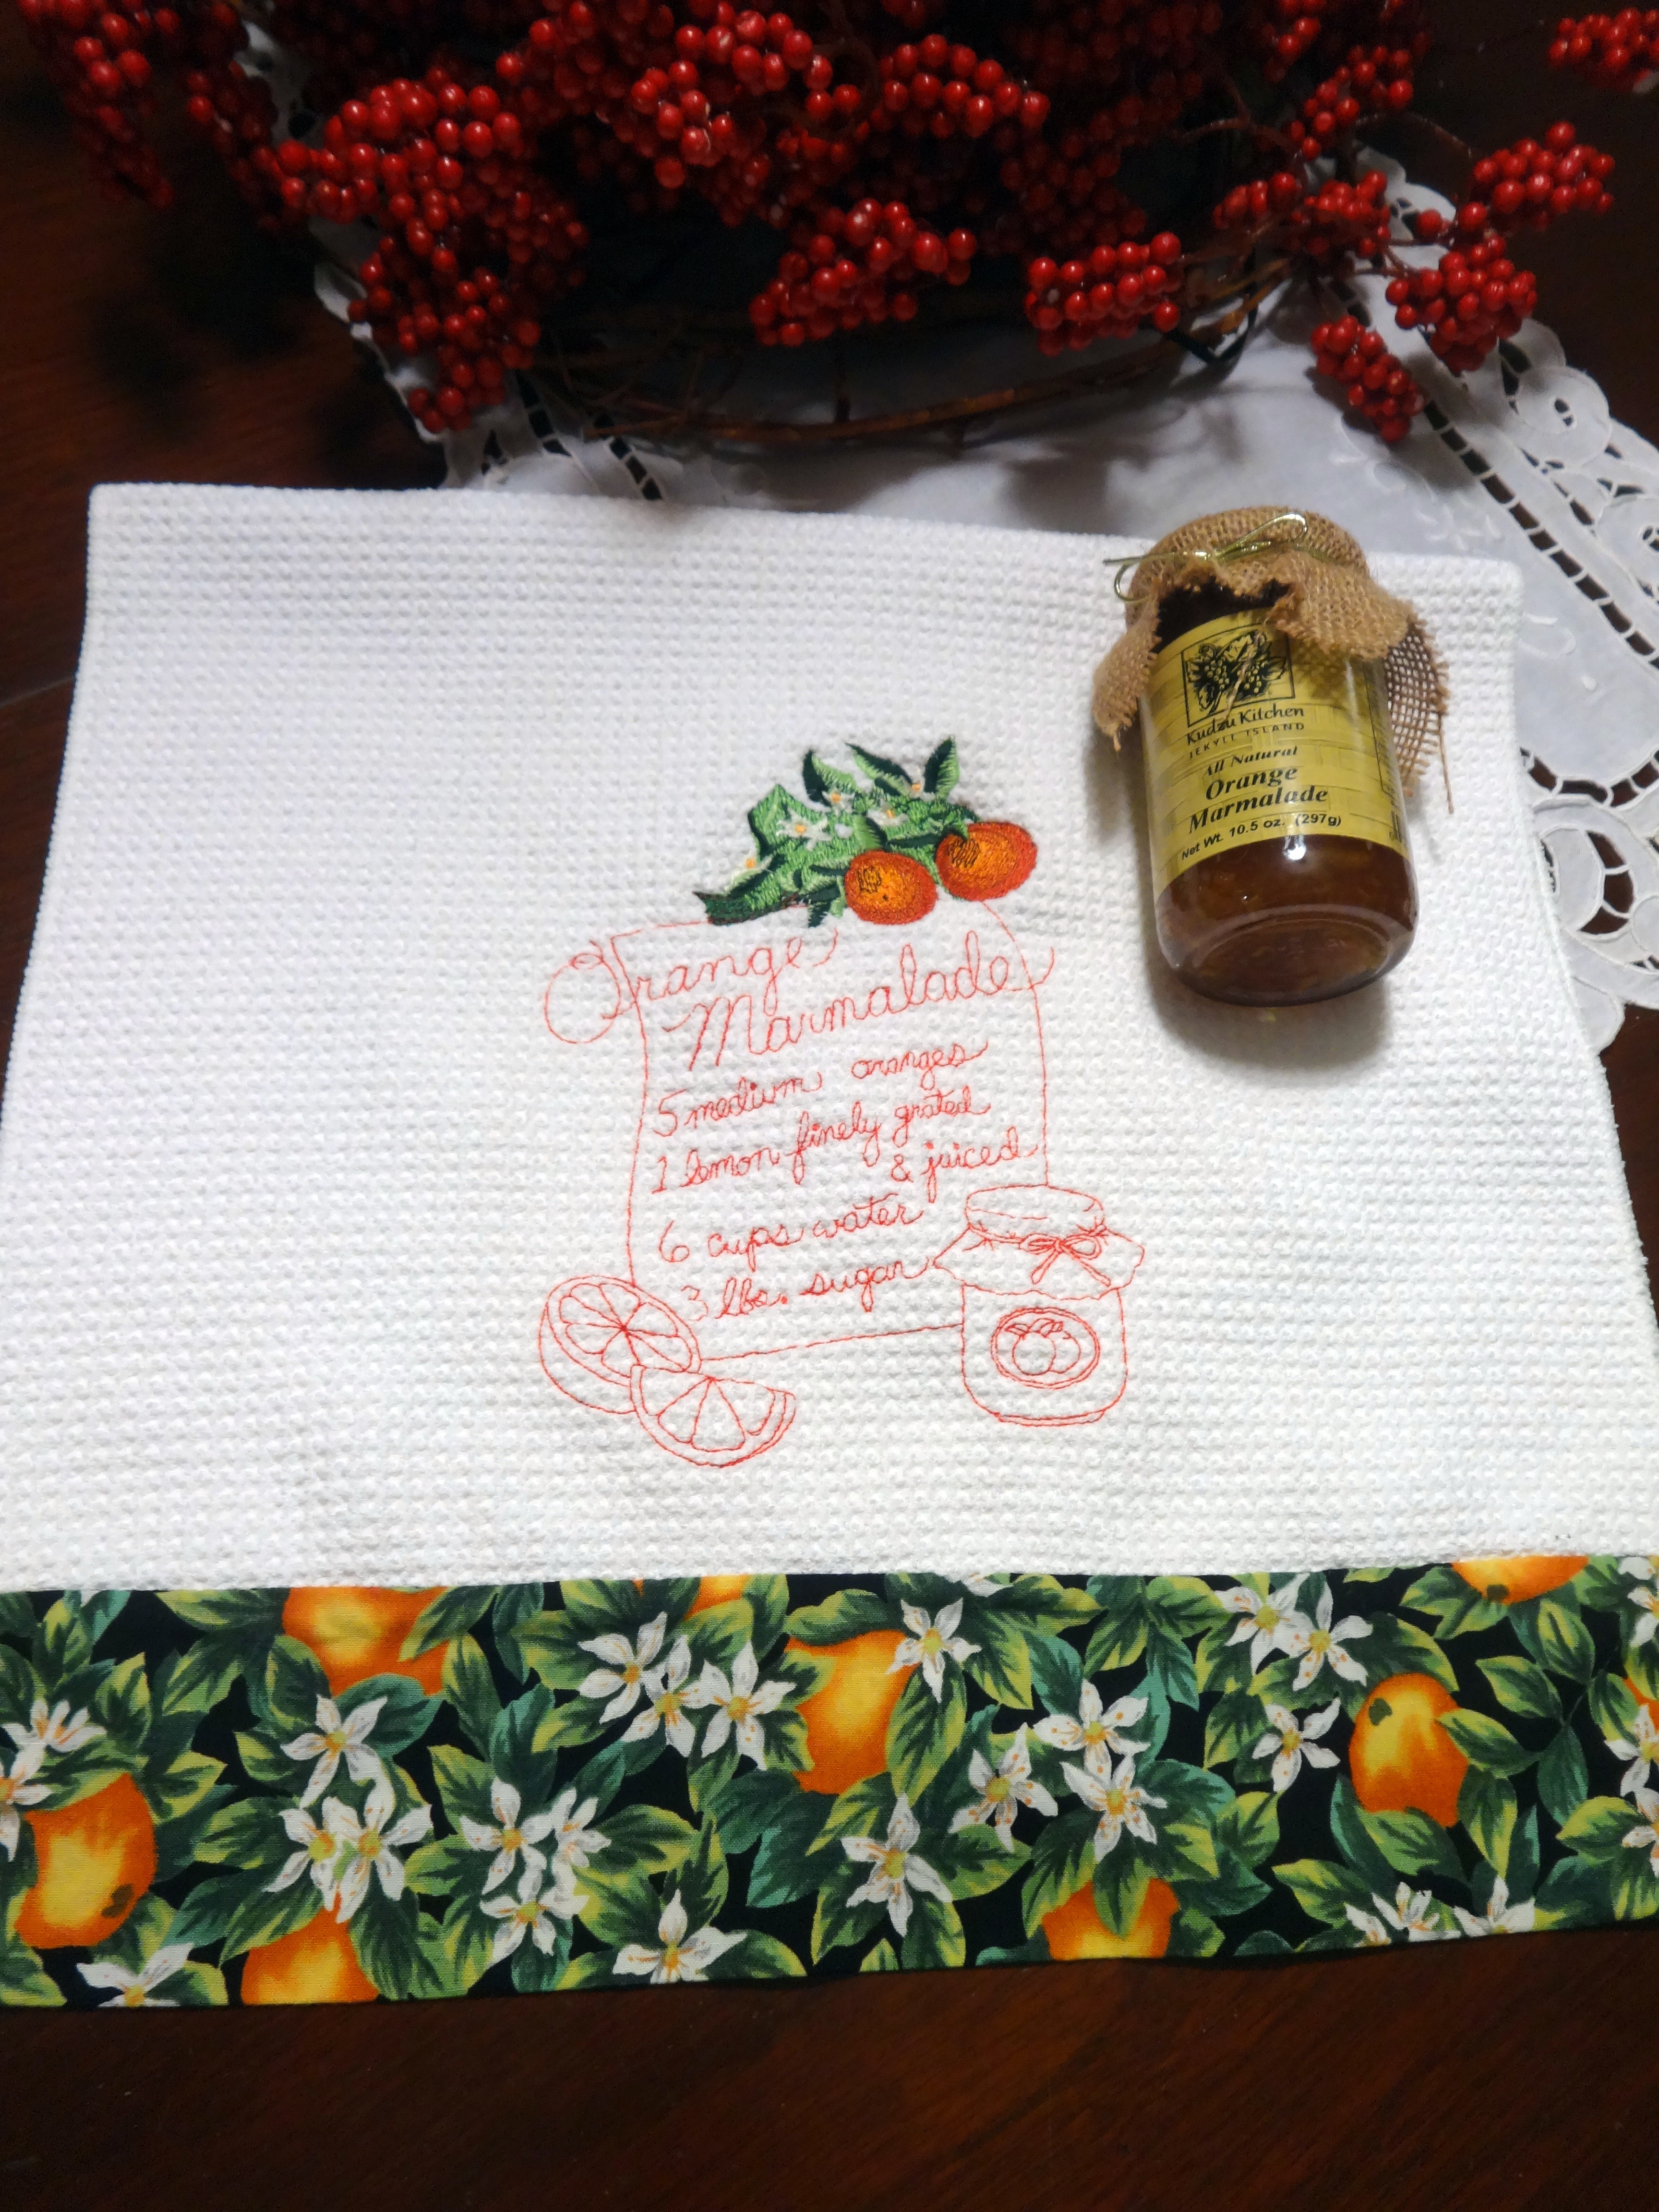 Orange marmalade recipe design from Embroidery Library with oranges added at the top..